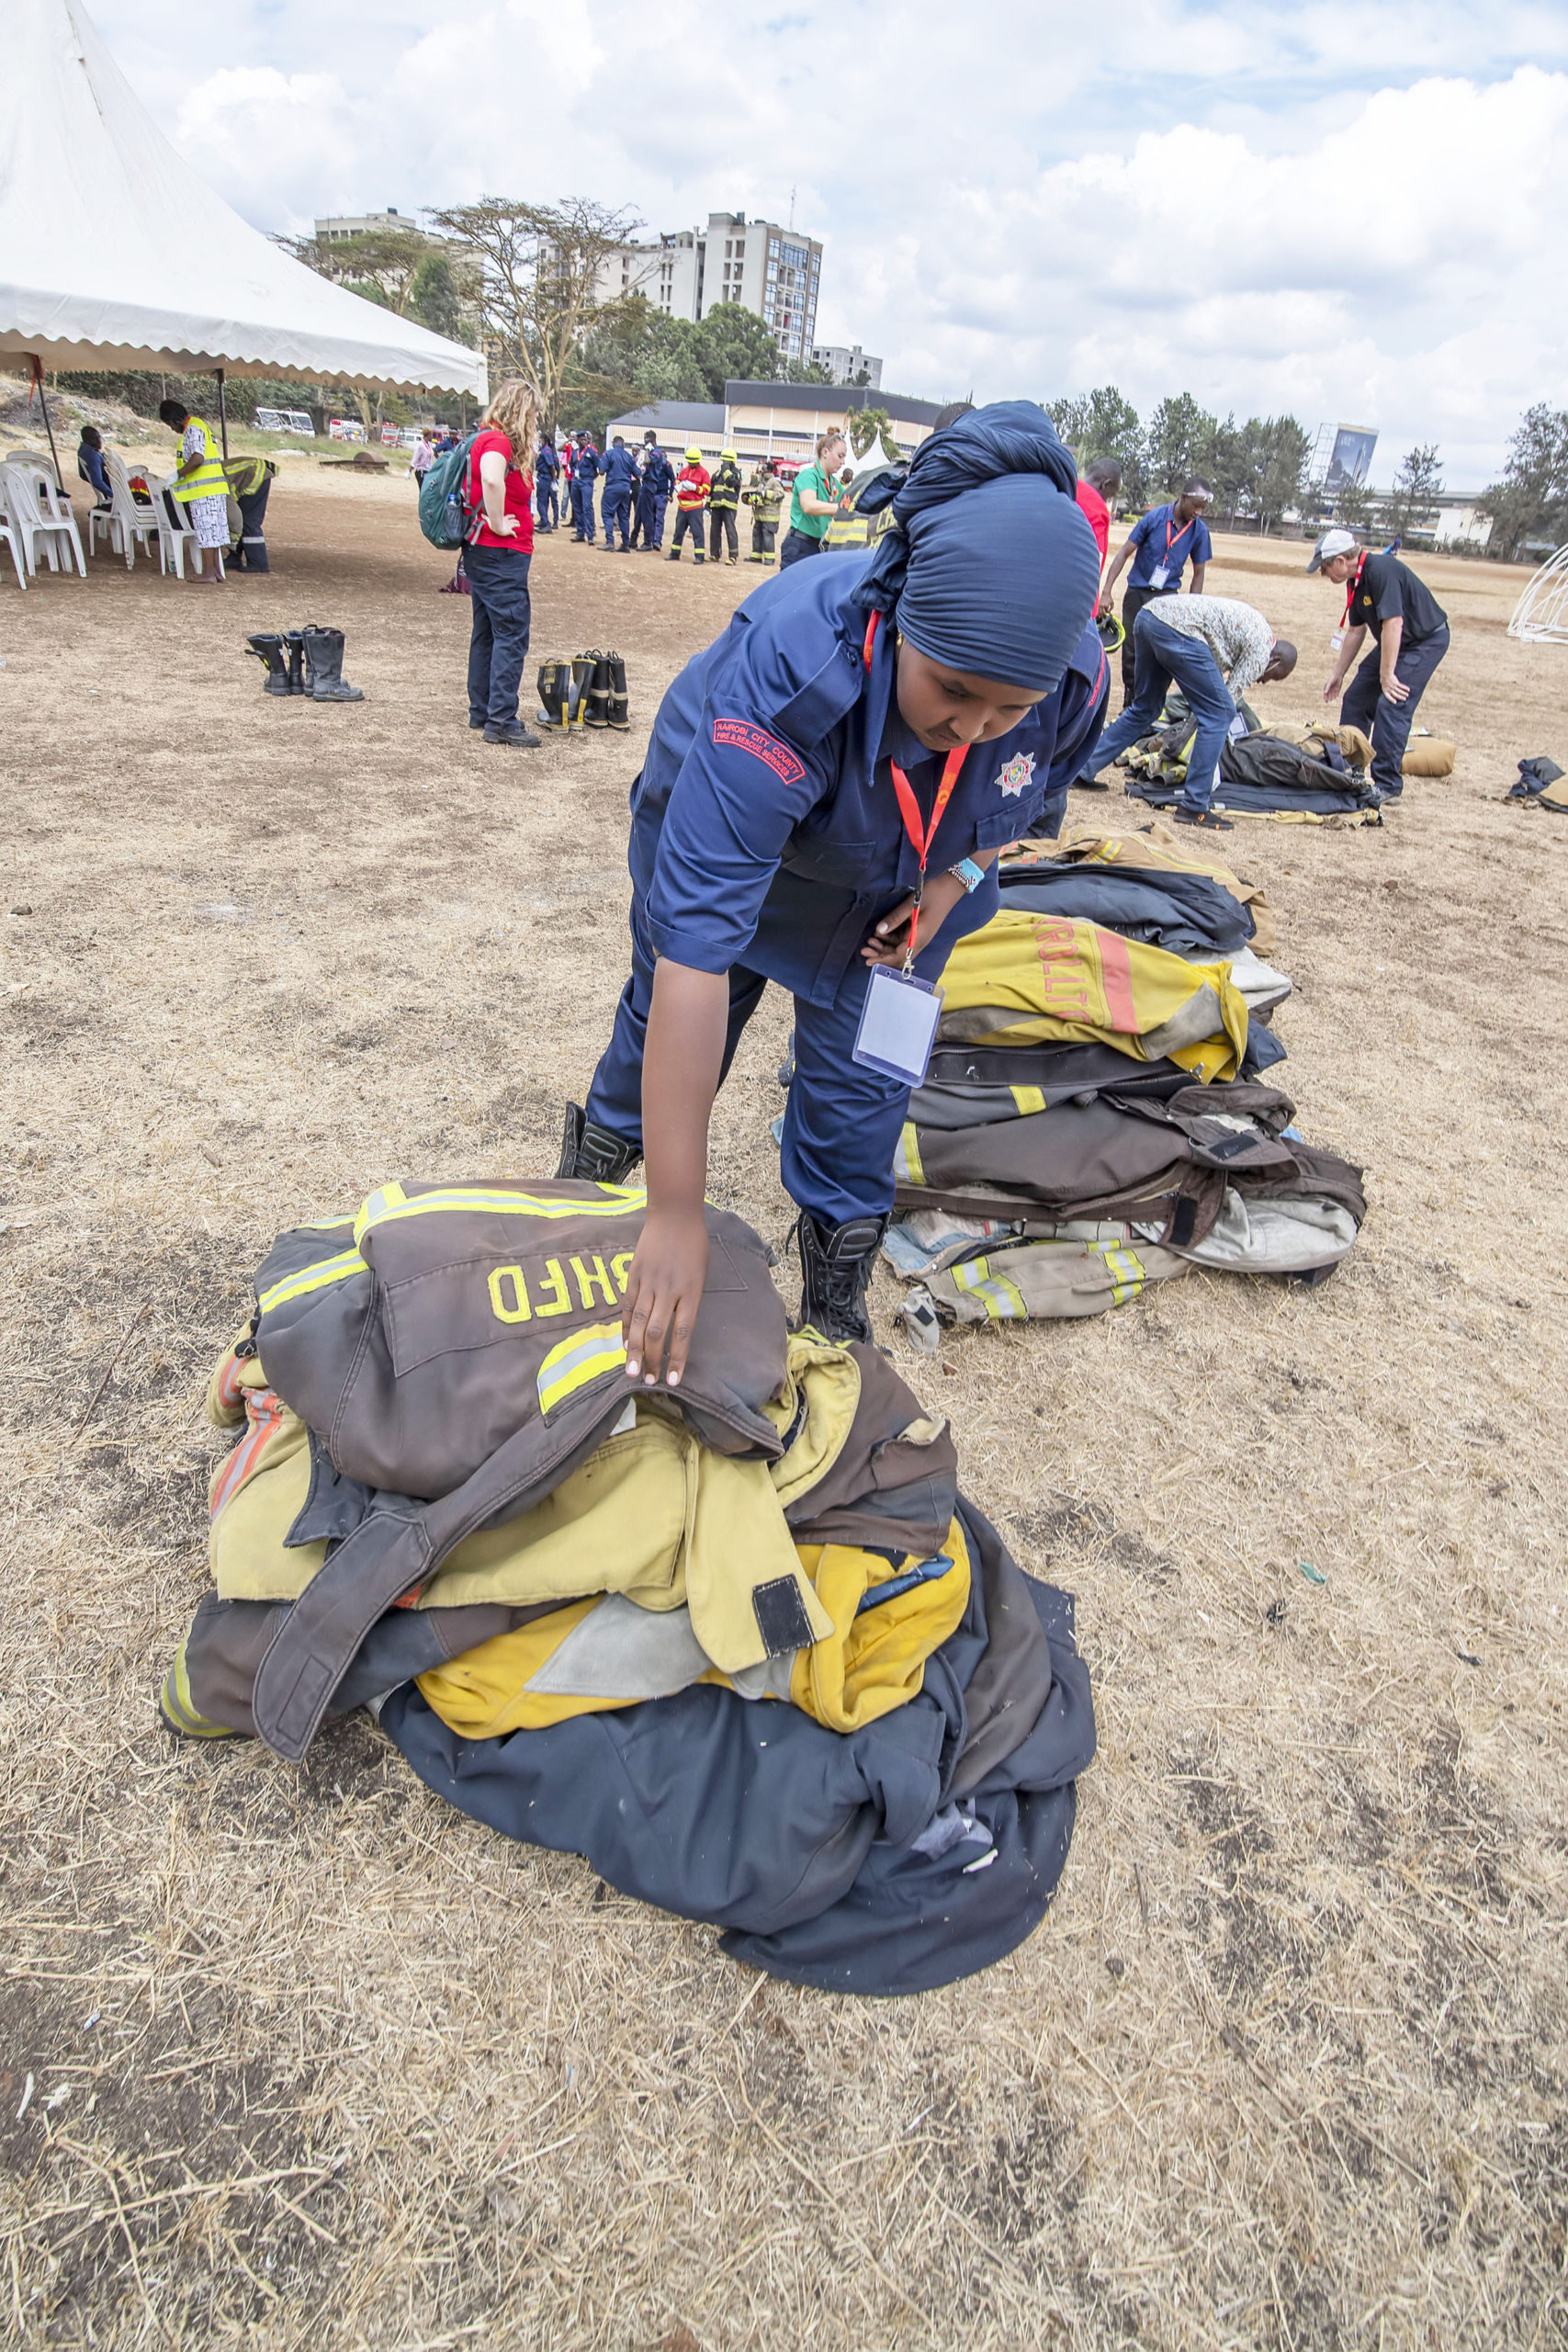 The Bridgehampton Fire Department donated turnout gear to Africa Fire Mission, which was distributed during the first day of training at the Kenya Police CID Training Academy.